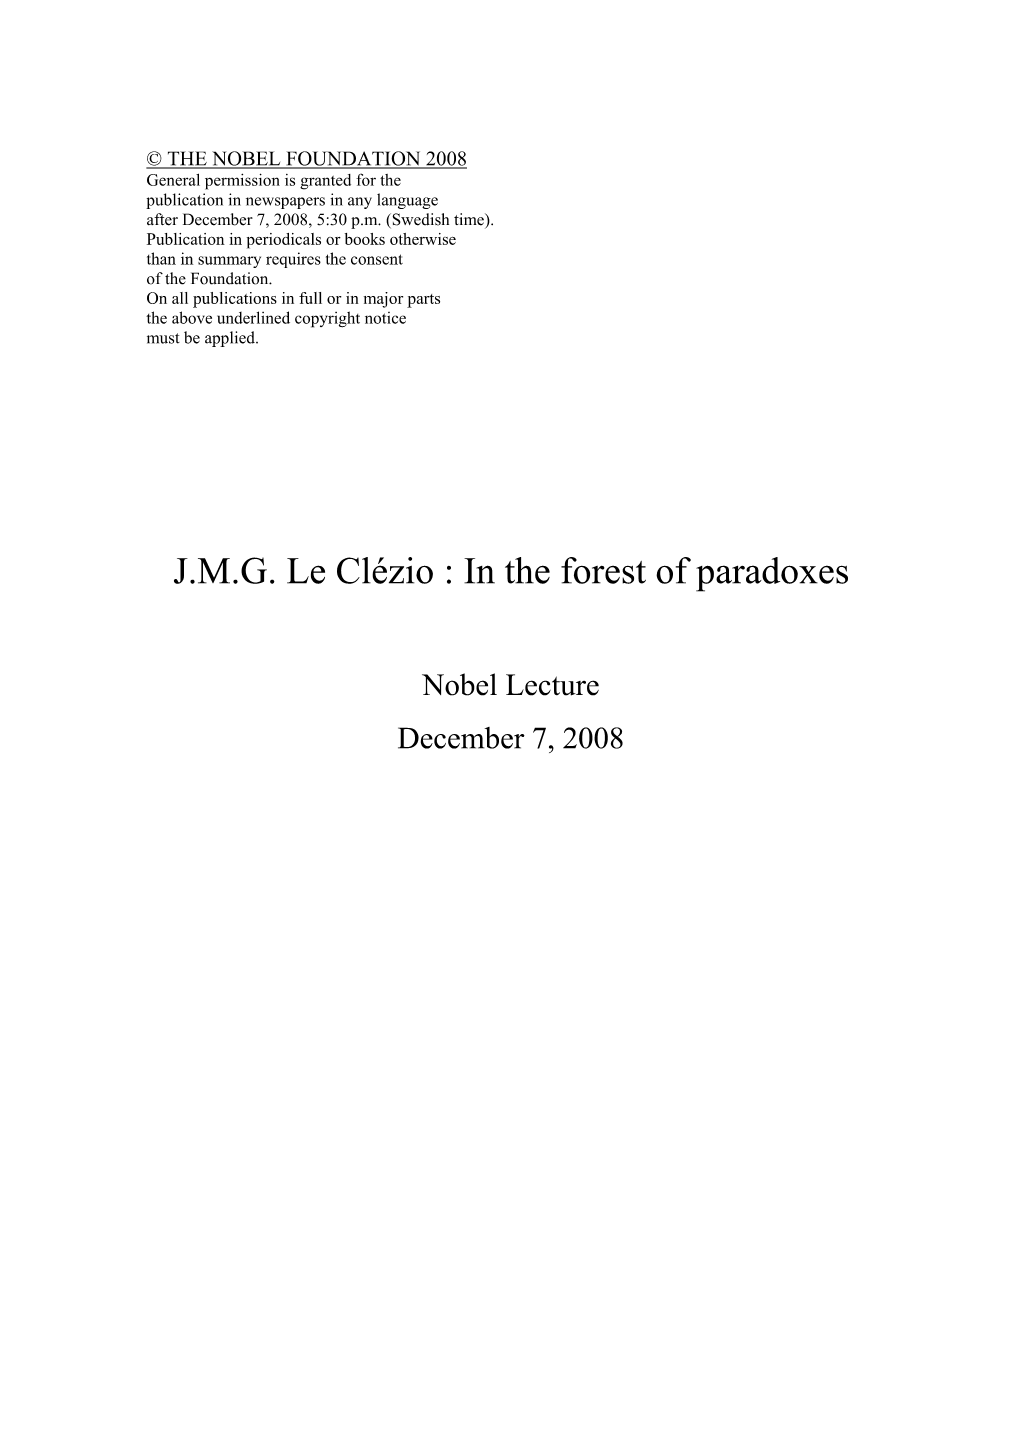 J.M.G. Le Clézio : in the Forest of Paradoxes